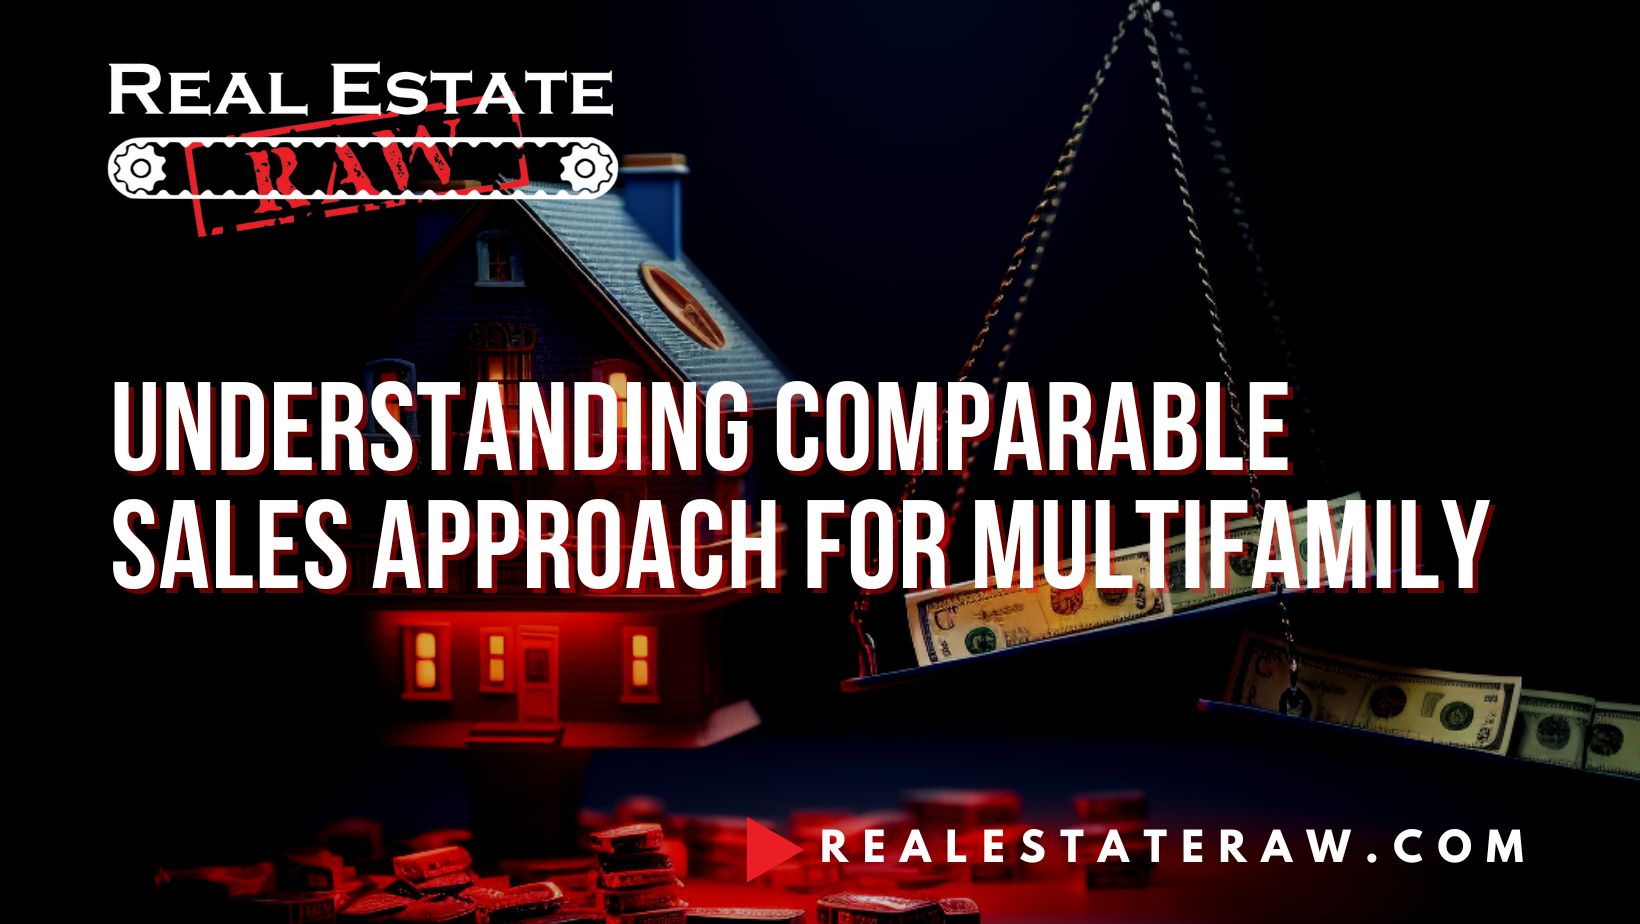 Comparable Sales Approach for Multifamily